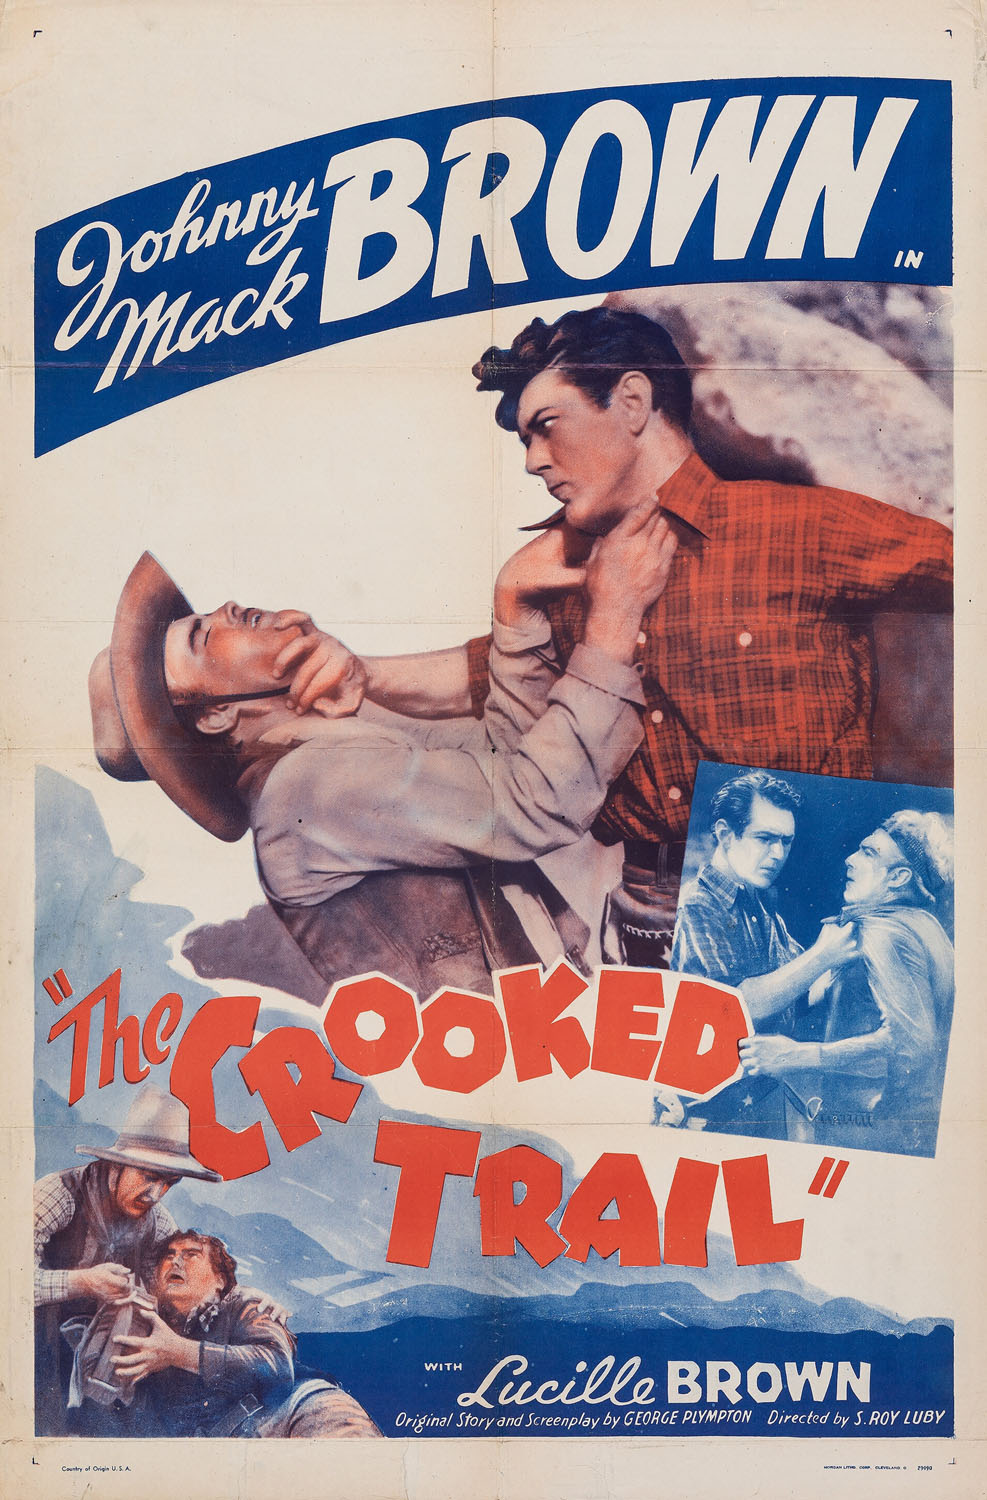 CROOKED TRAIL, THE